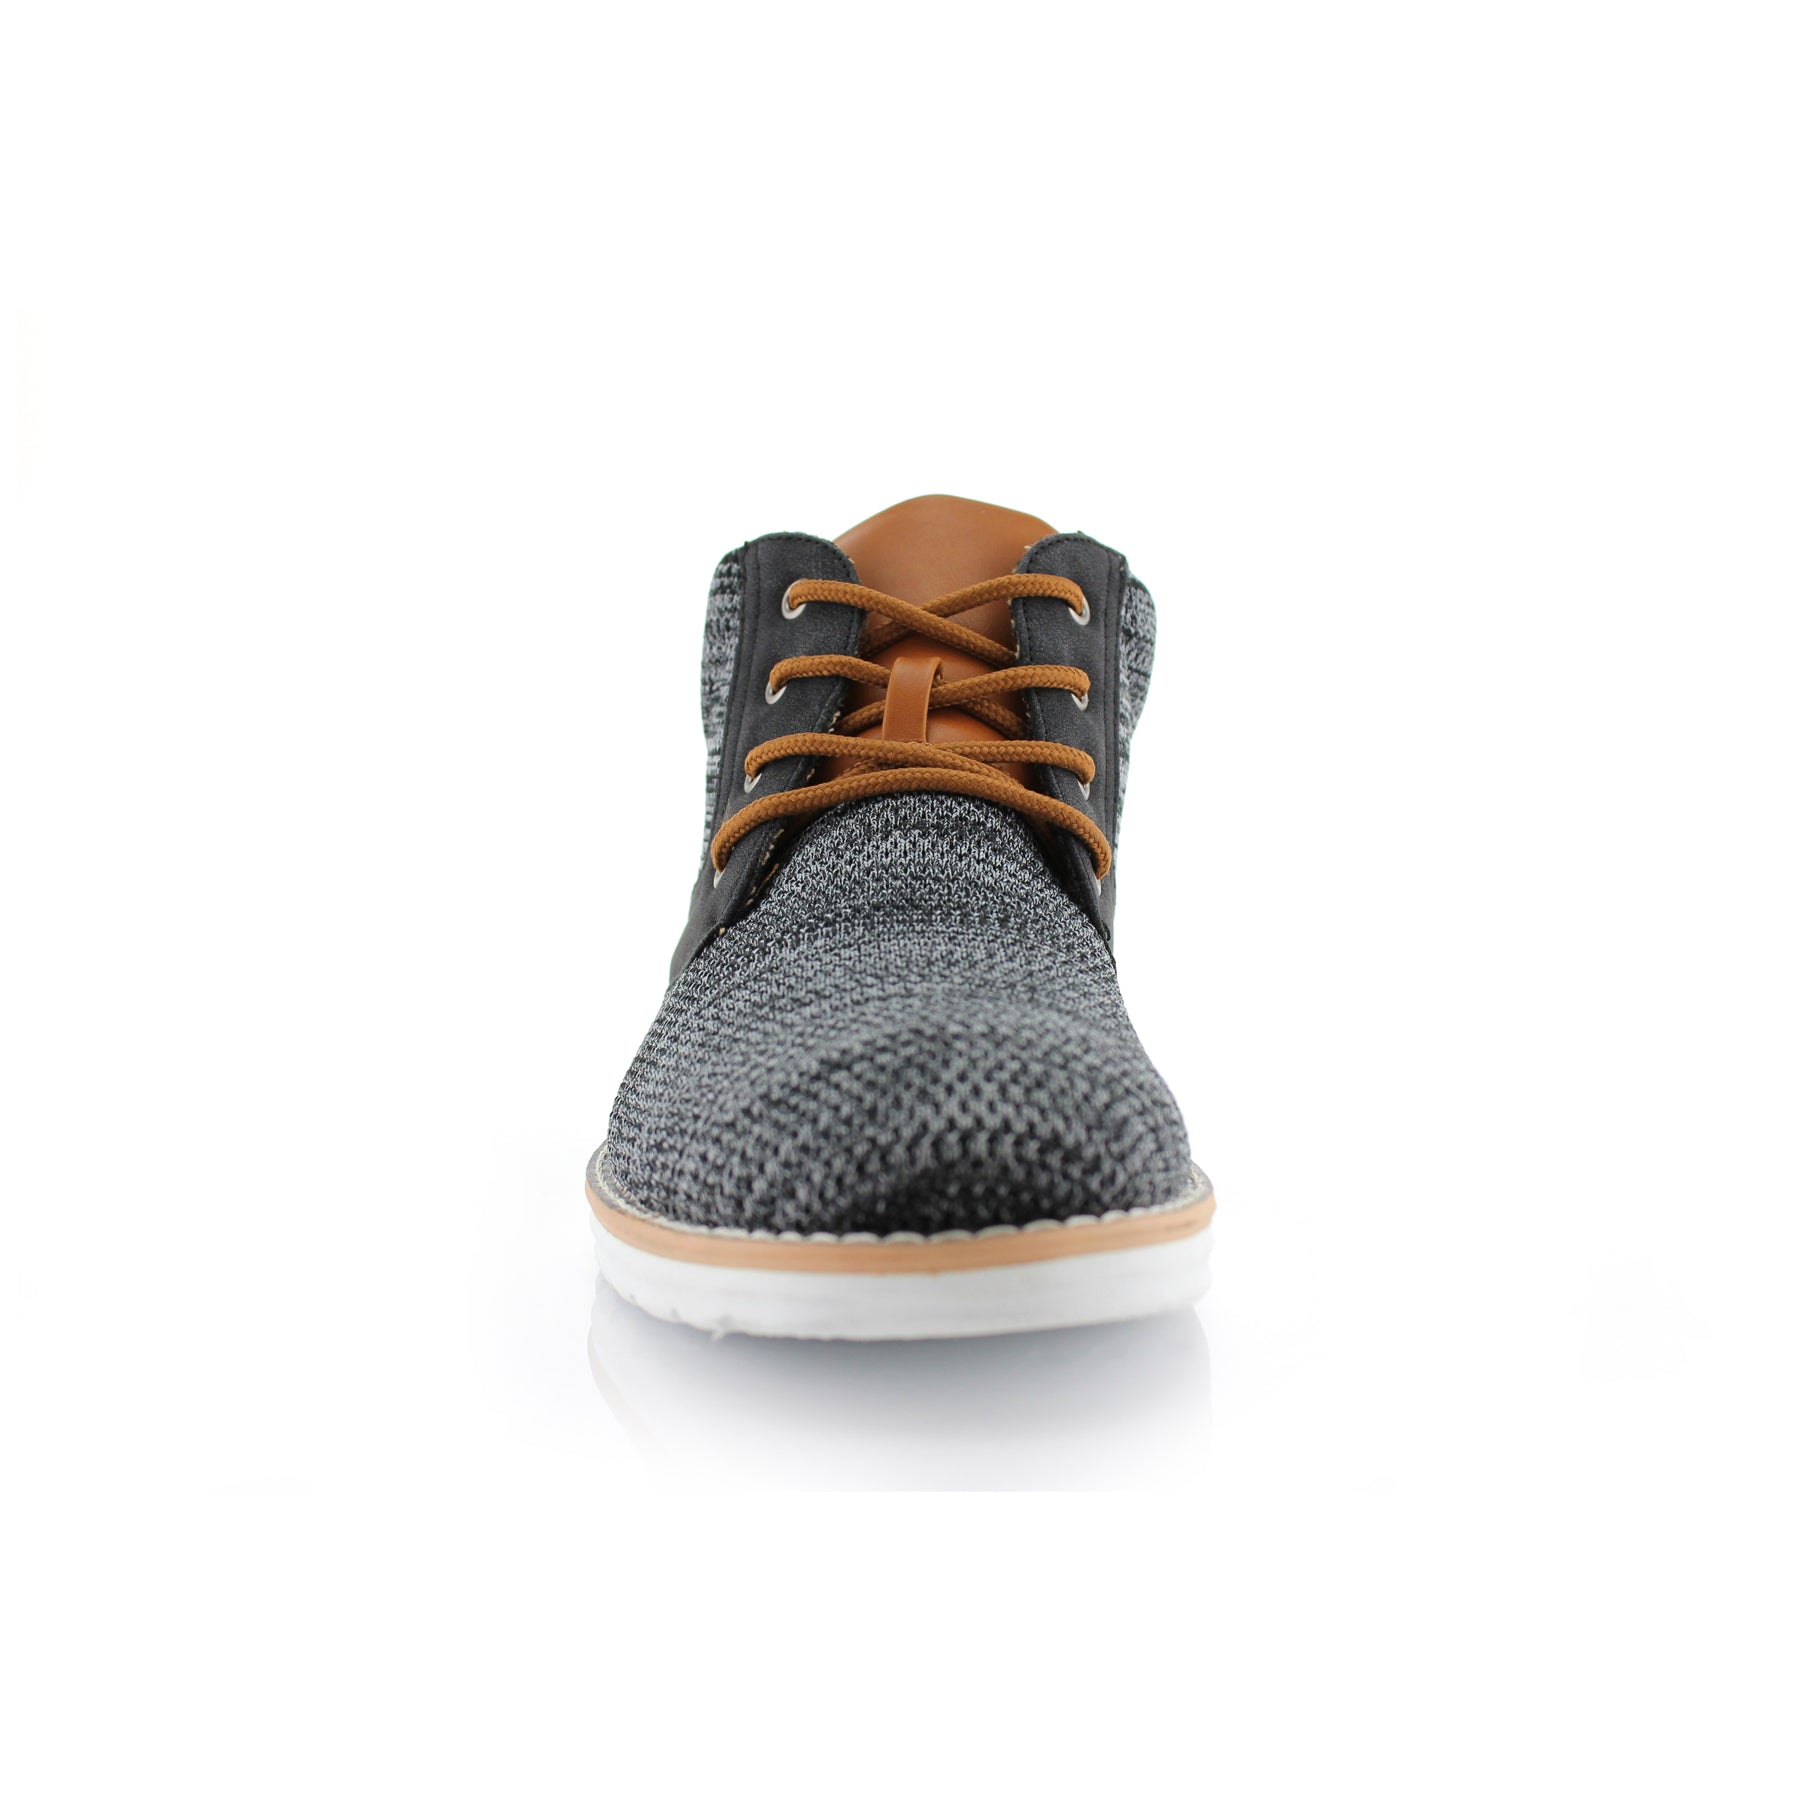 Duo-textured Sneaker Chukka Boots | Bohort by Polar Fox | Conal Footwear | Front Angle View